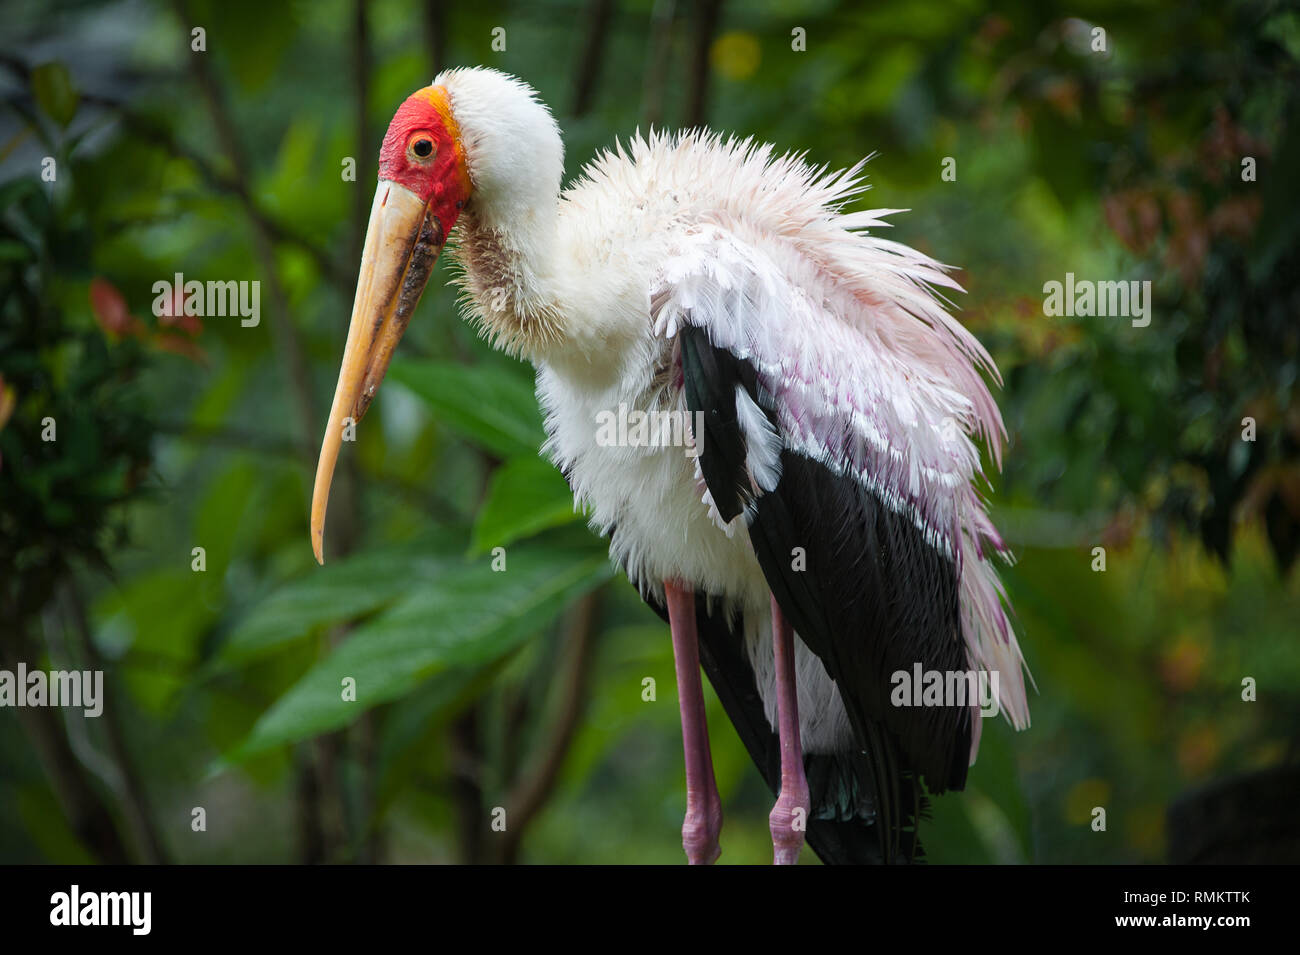 Portrait of a Yellow-billed stork (Mycteria ibis), sometime called wood stork or wood ibis. Stock Photo